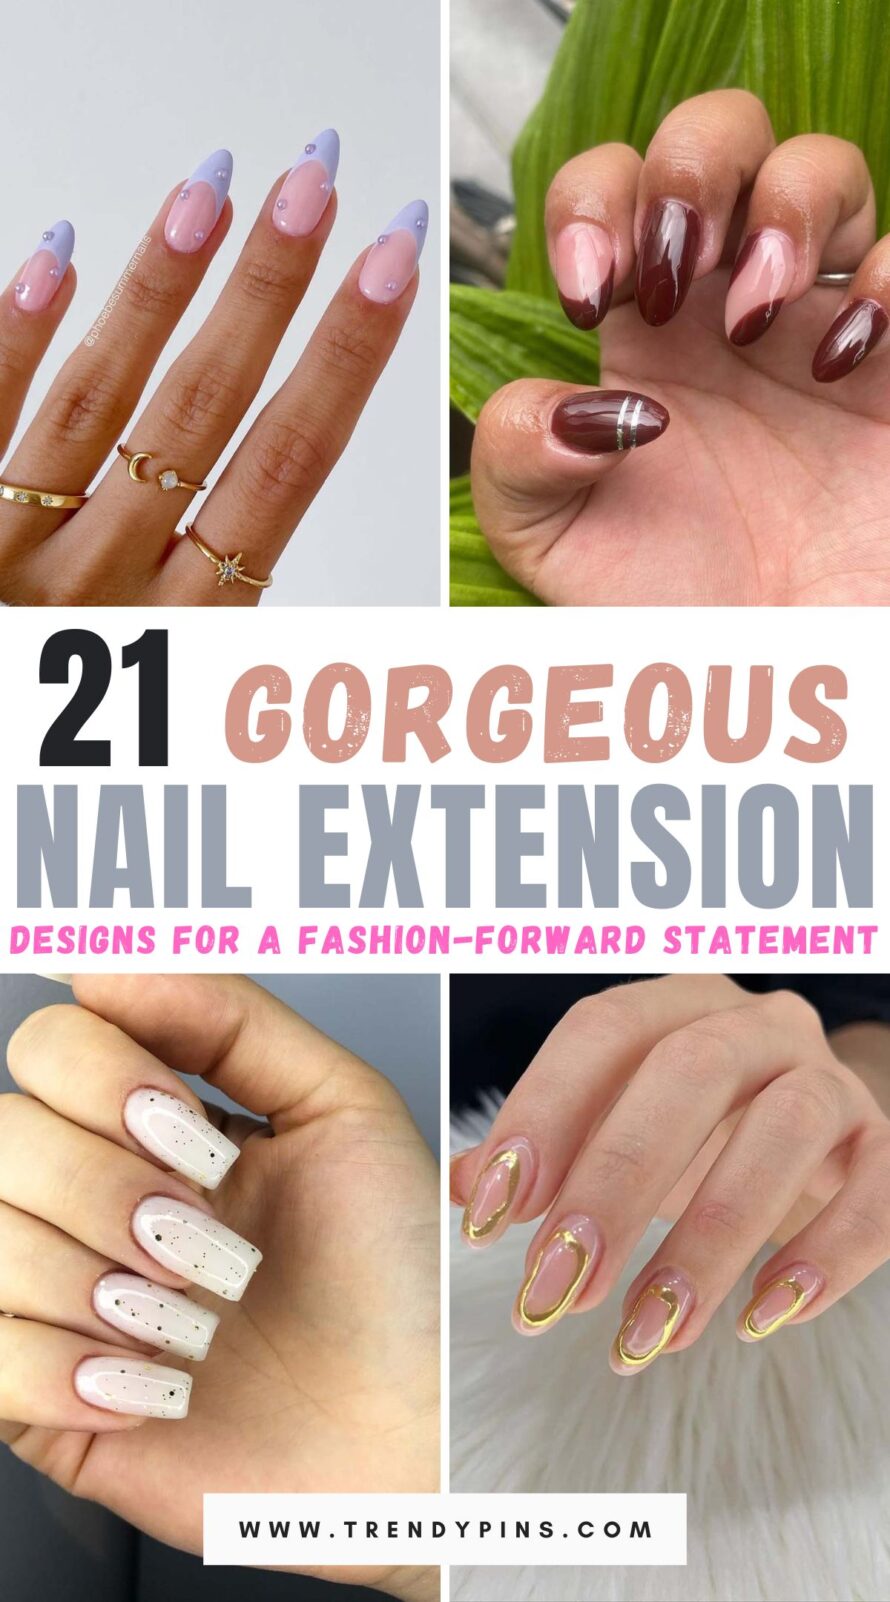 Discover 21 stunning nail extension designs combining beauty and trendiness, perfect for any style enthusiast looking for a fresh look.
